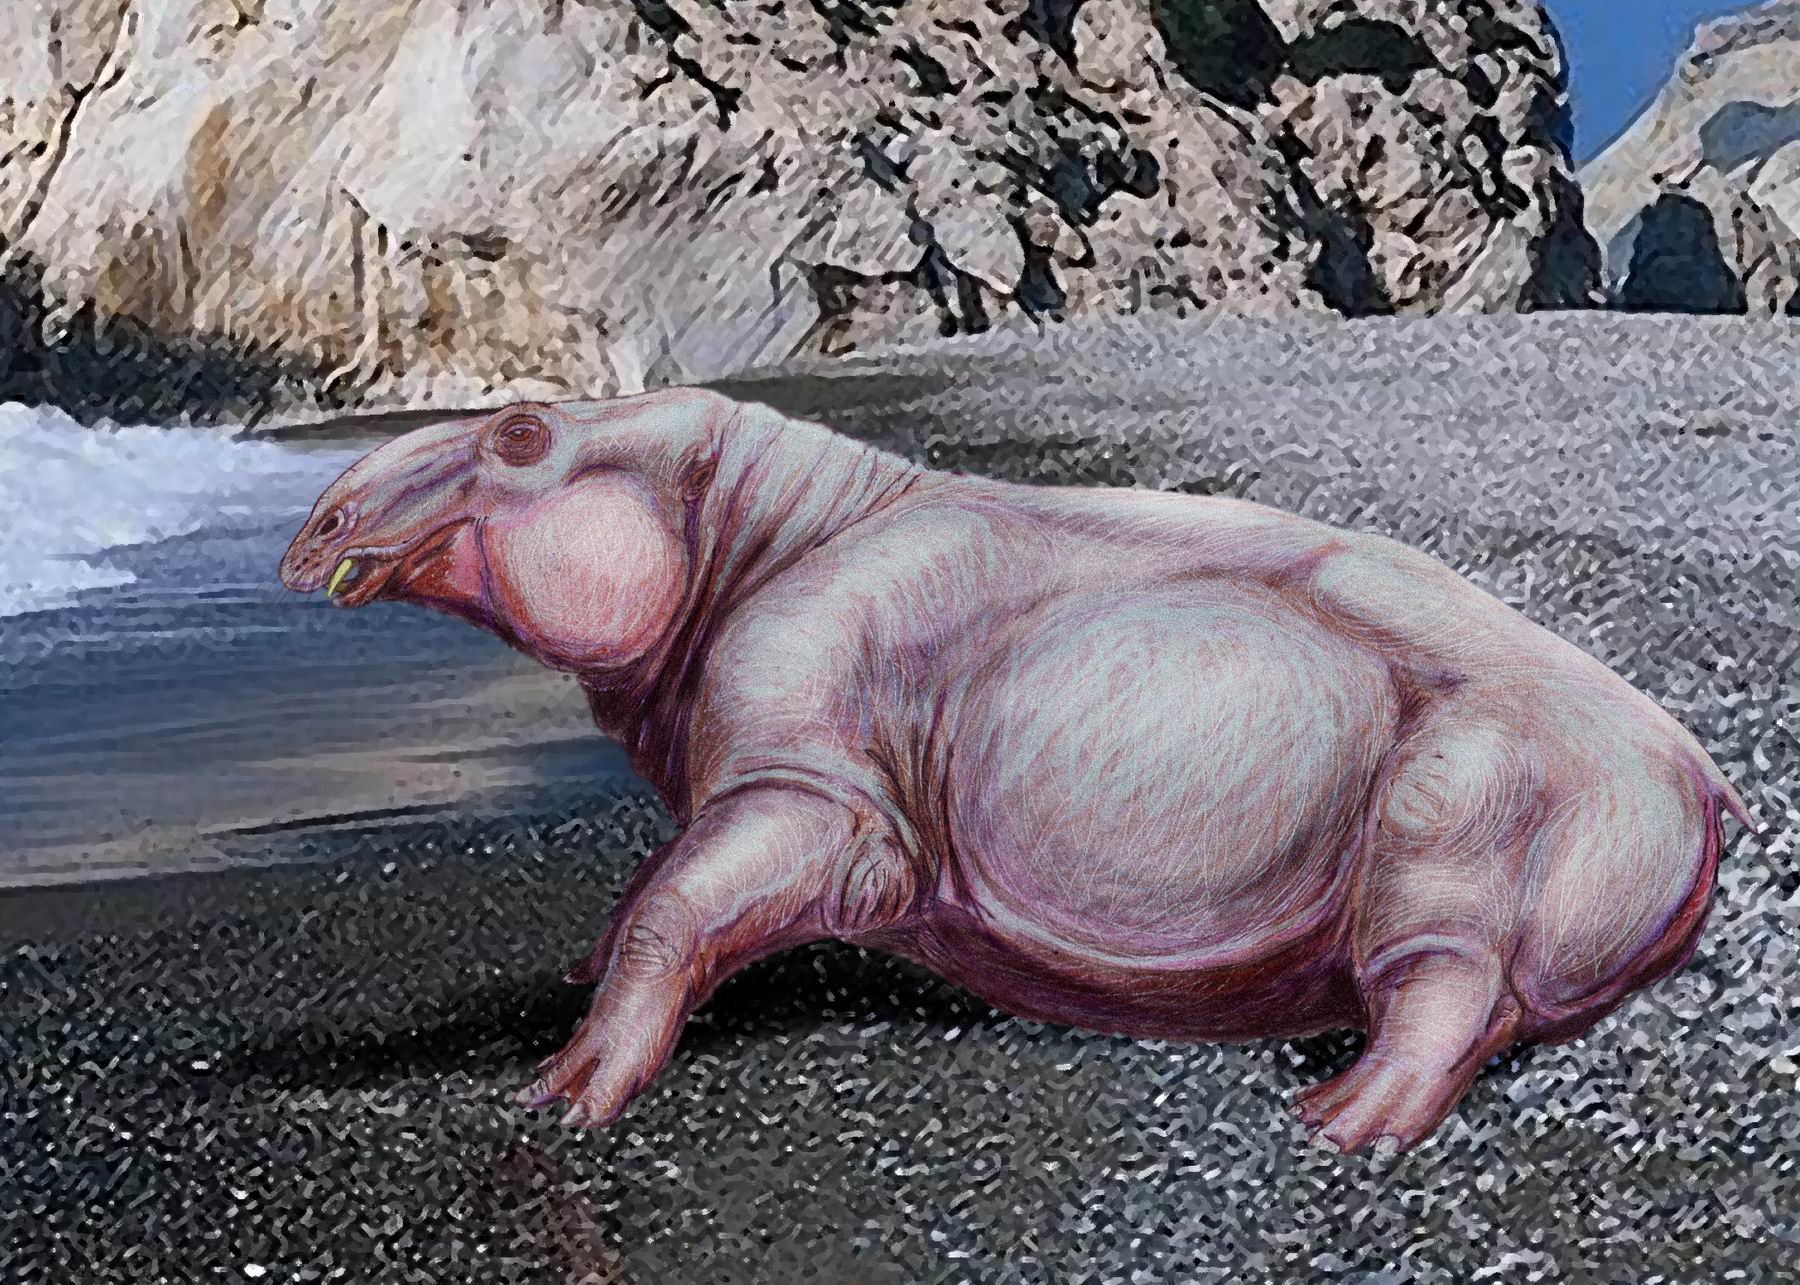 Drawing reconstracting a desmostylian sitting on a beach. The desmostylian is hippo-like, with four short legs, a barrel-like body, a large lead, and a short tail. A small tusk can be seen protruding from the upper jaw.